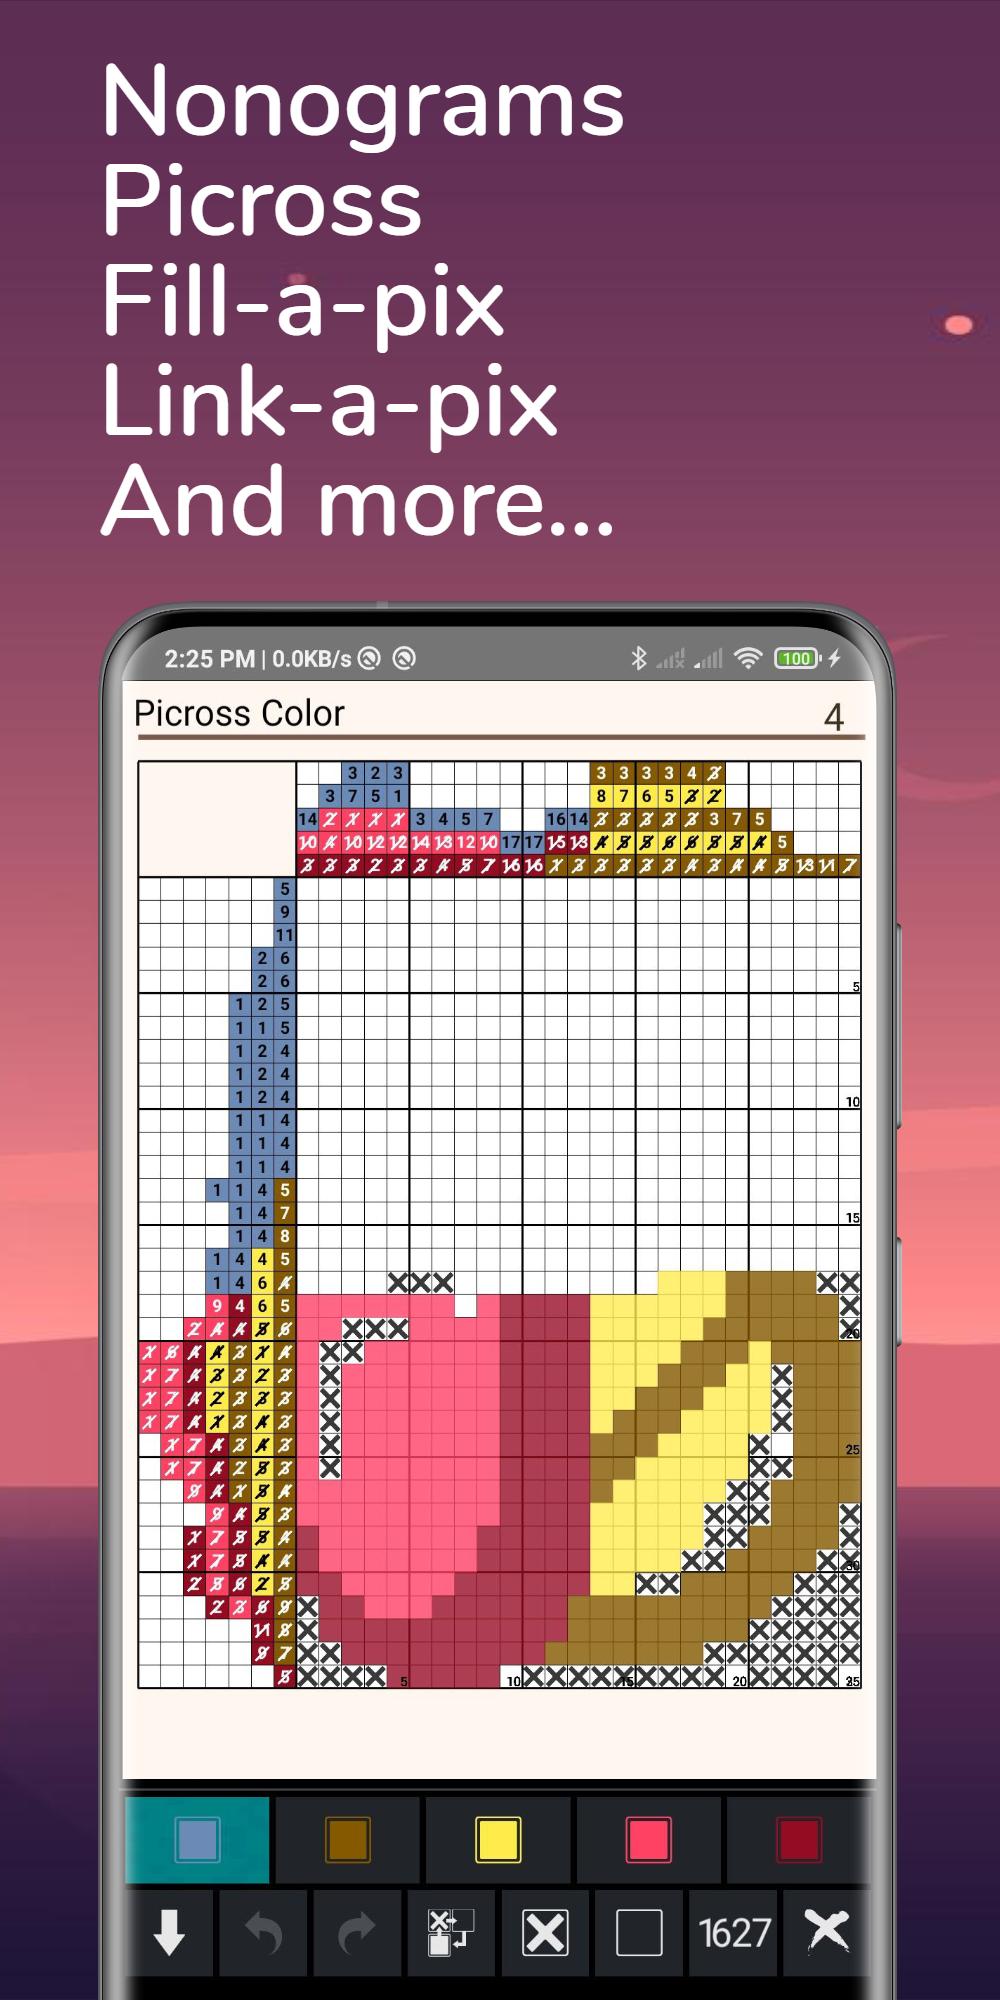 Daily Logic Puzzles & Number Games 1.9.4 Screenshot 4